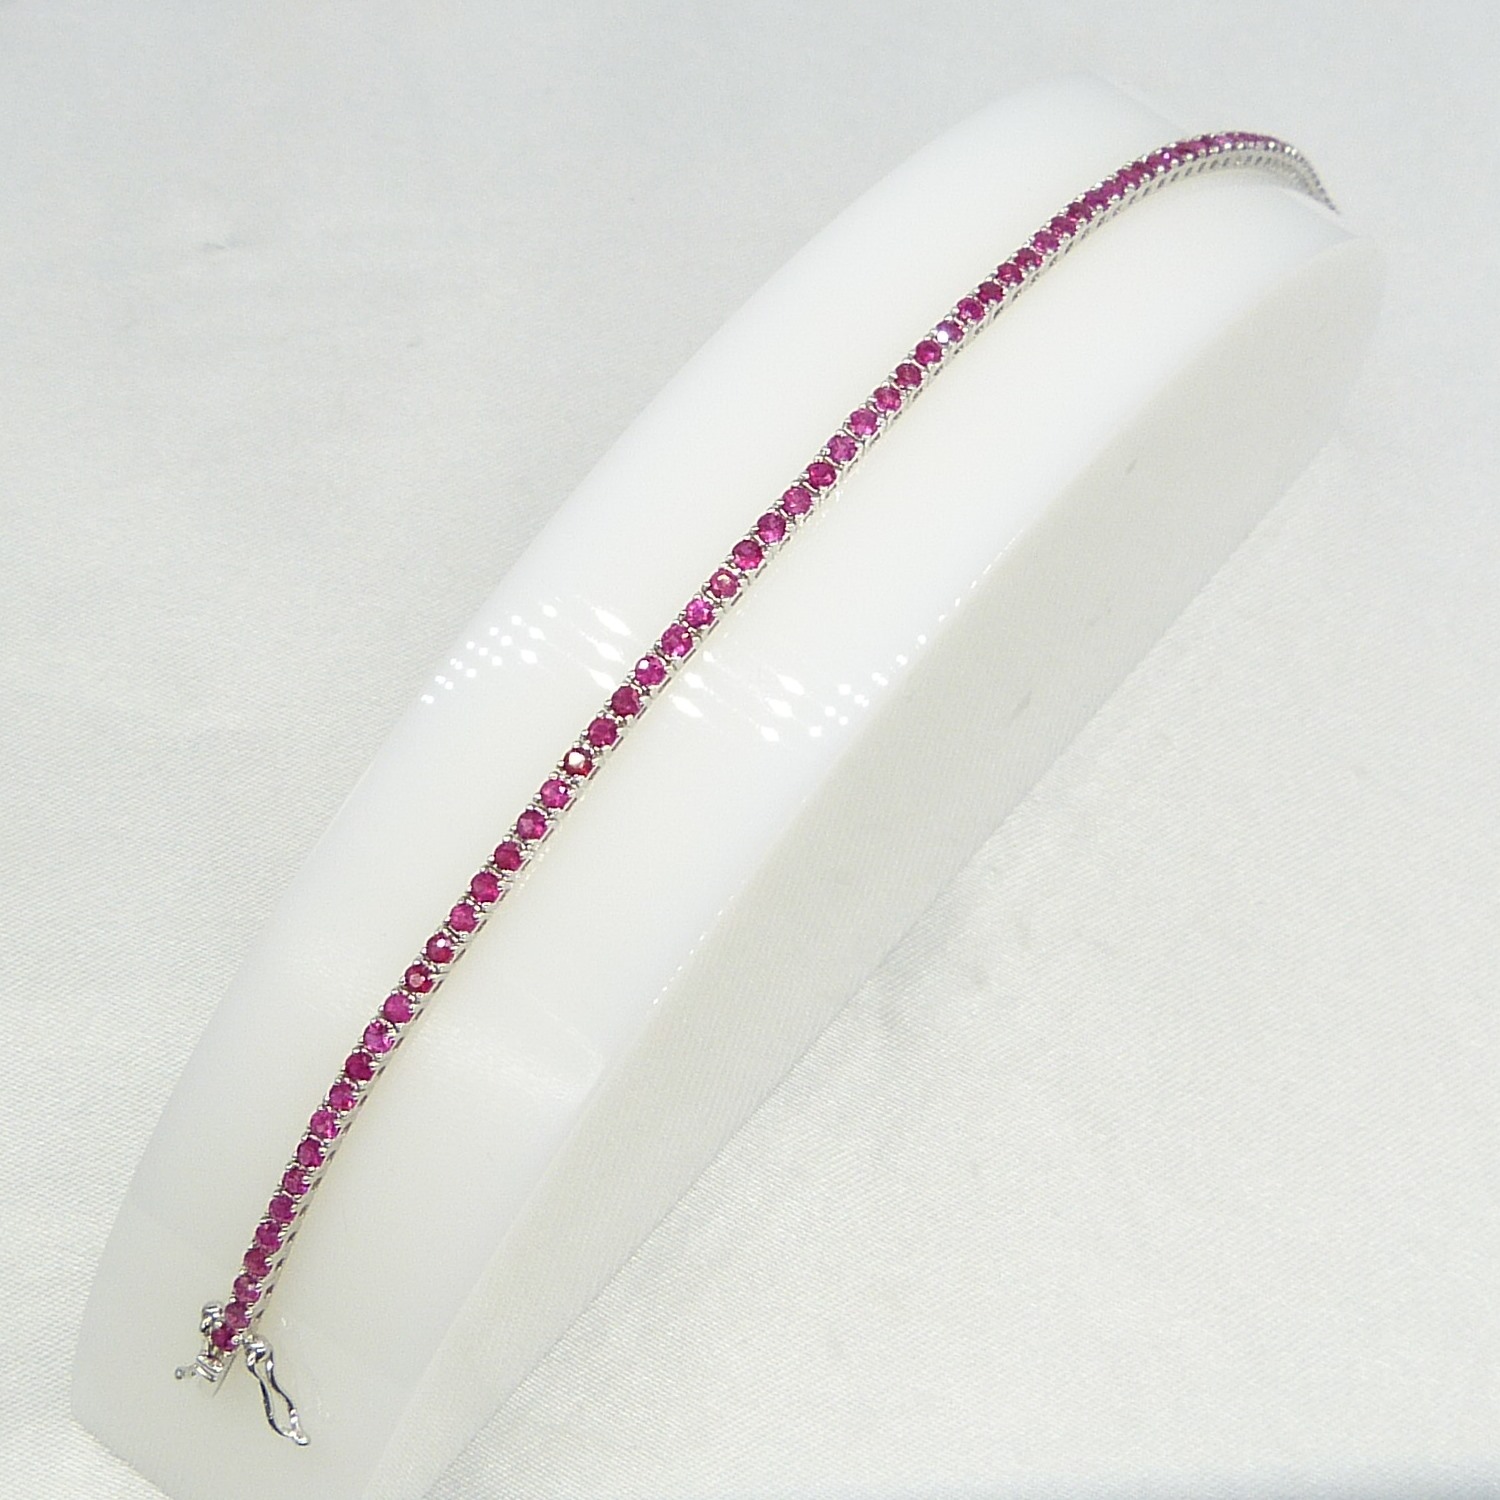 3.21 Carat Ruby Articulated Line Bracelet In 18ct White Gold, Boxed - Image 2 of 3